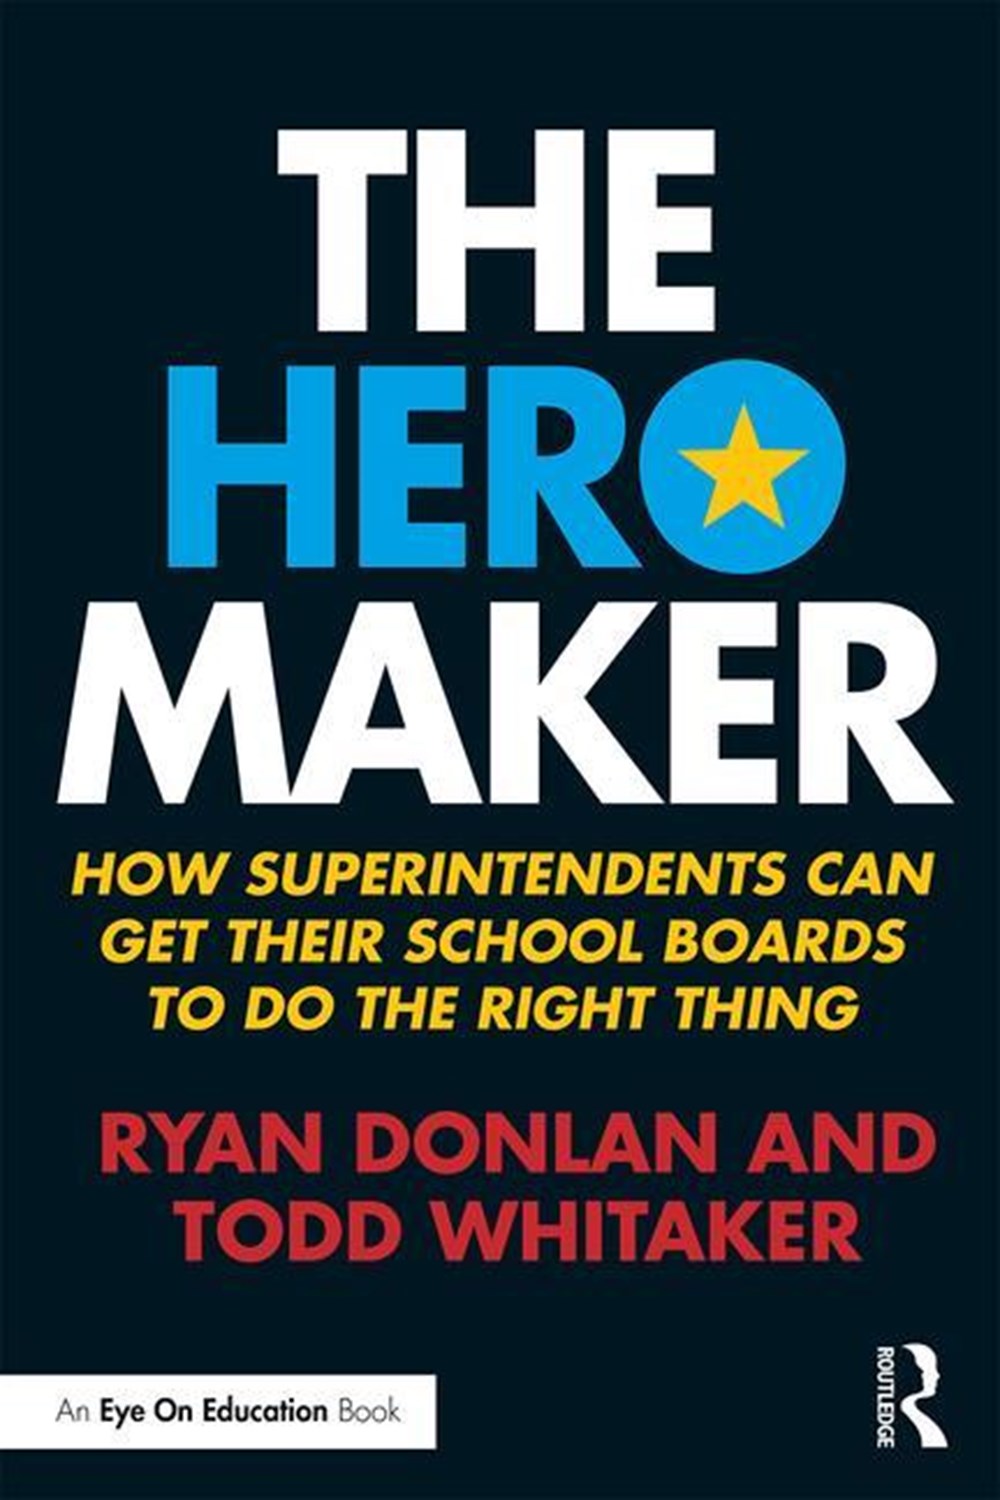 Hero Maker: How Superintendents Can Get Their School Boards to Do the Right Thing